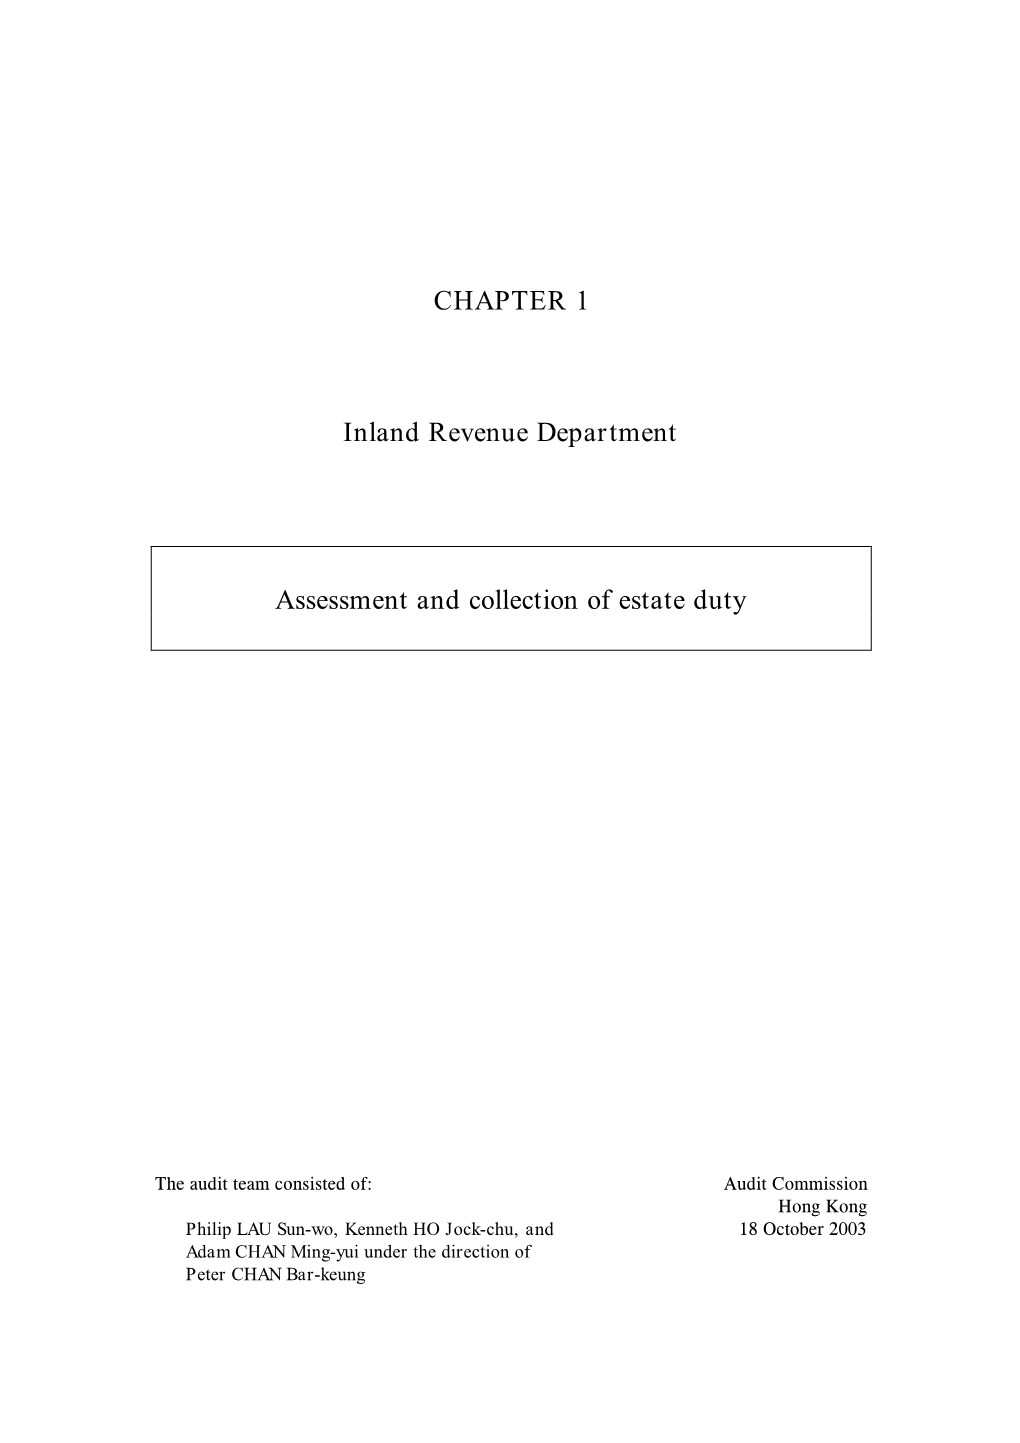 CHAPTER 1 Inland Revenue Department Assessment and Collection of Estate Duty